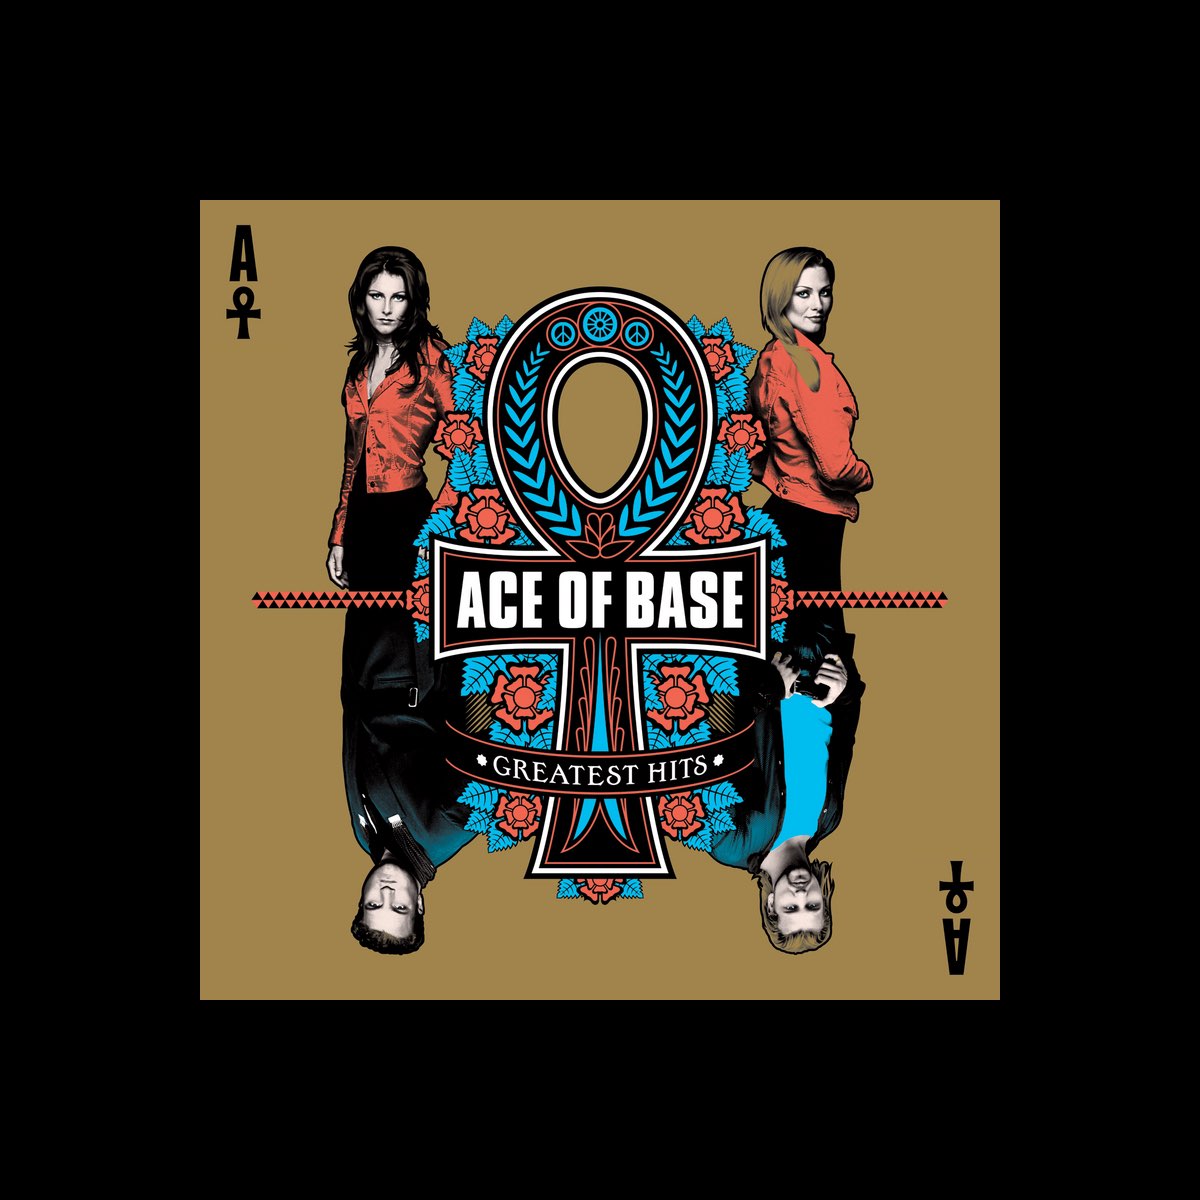 Wheel of fortune ace of base remix. Ace of Base the sign 1993. Ace of Base Wheel of Fortune. Ace of Base – Greatest Hits 2000 обложка. Ace of Base never gonna say i'm sorry.